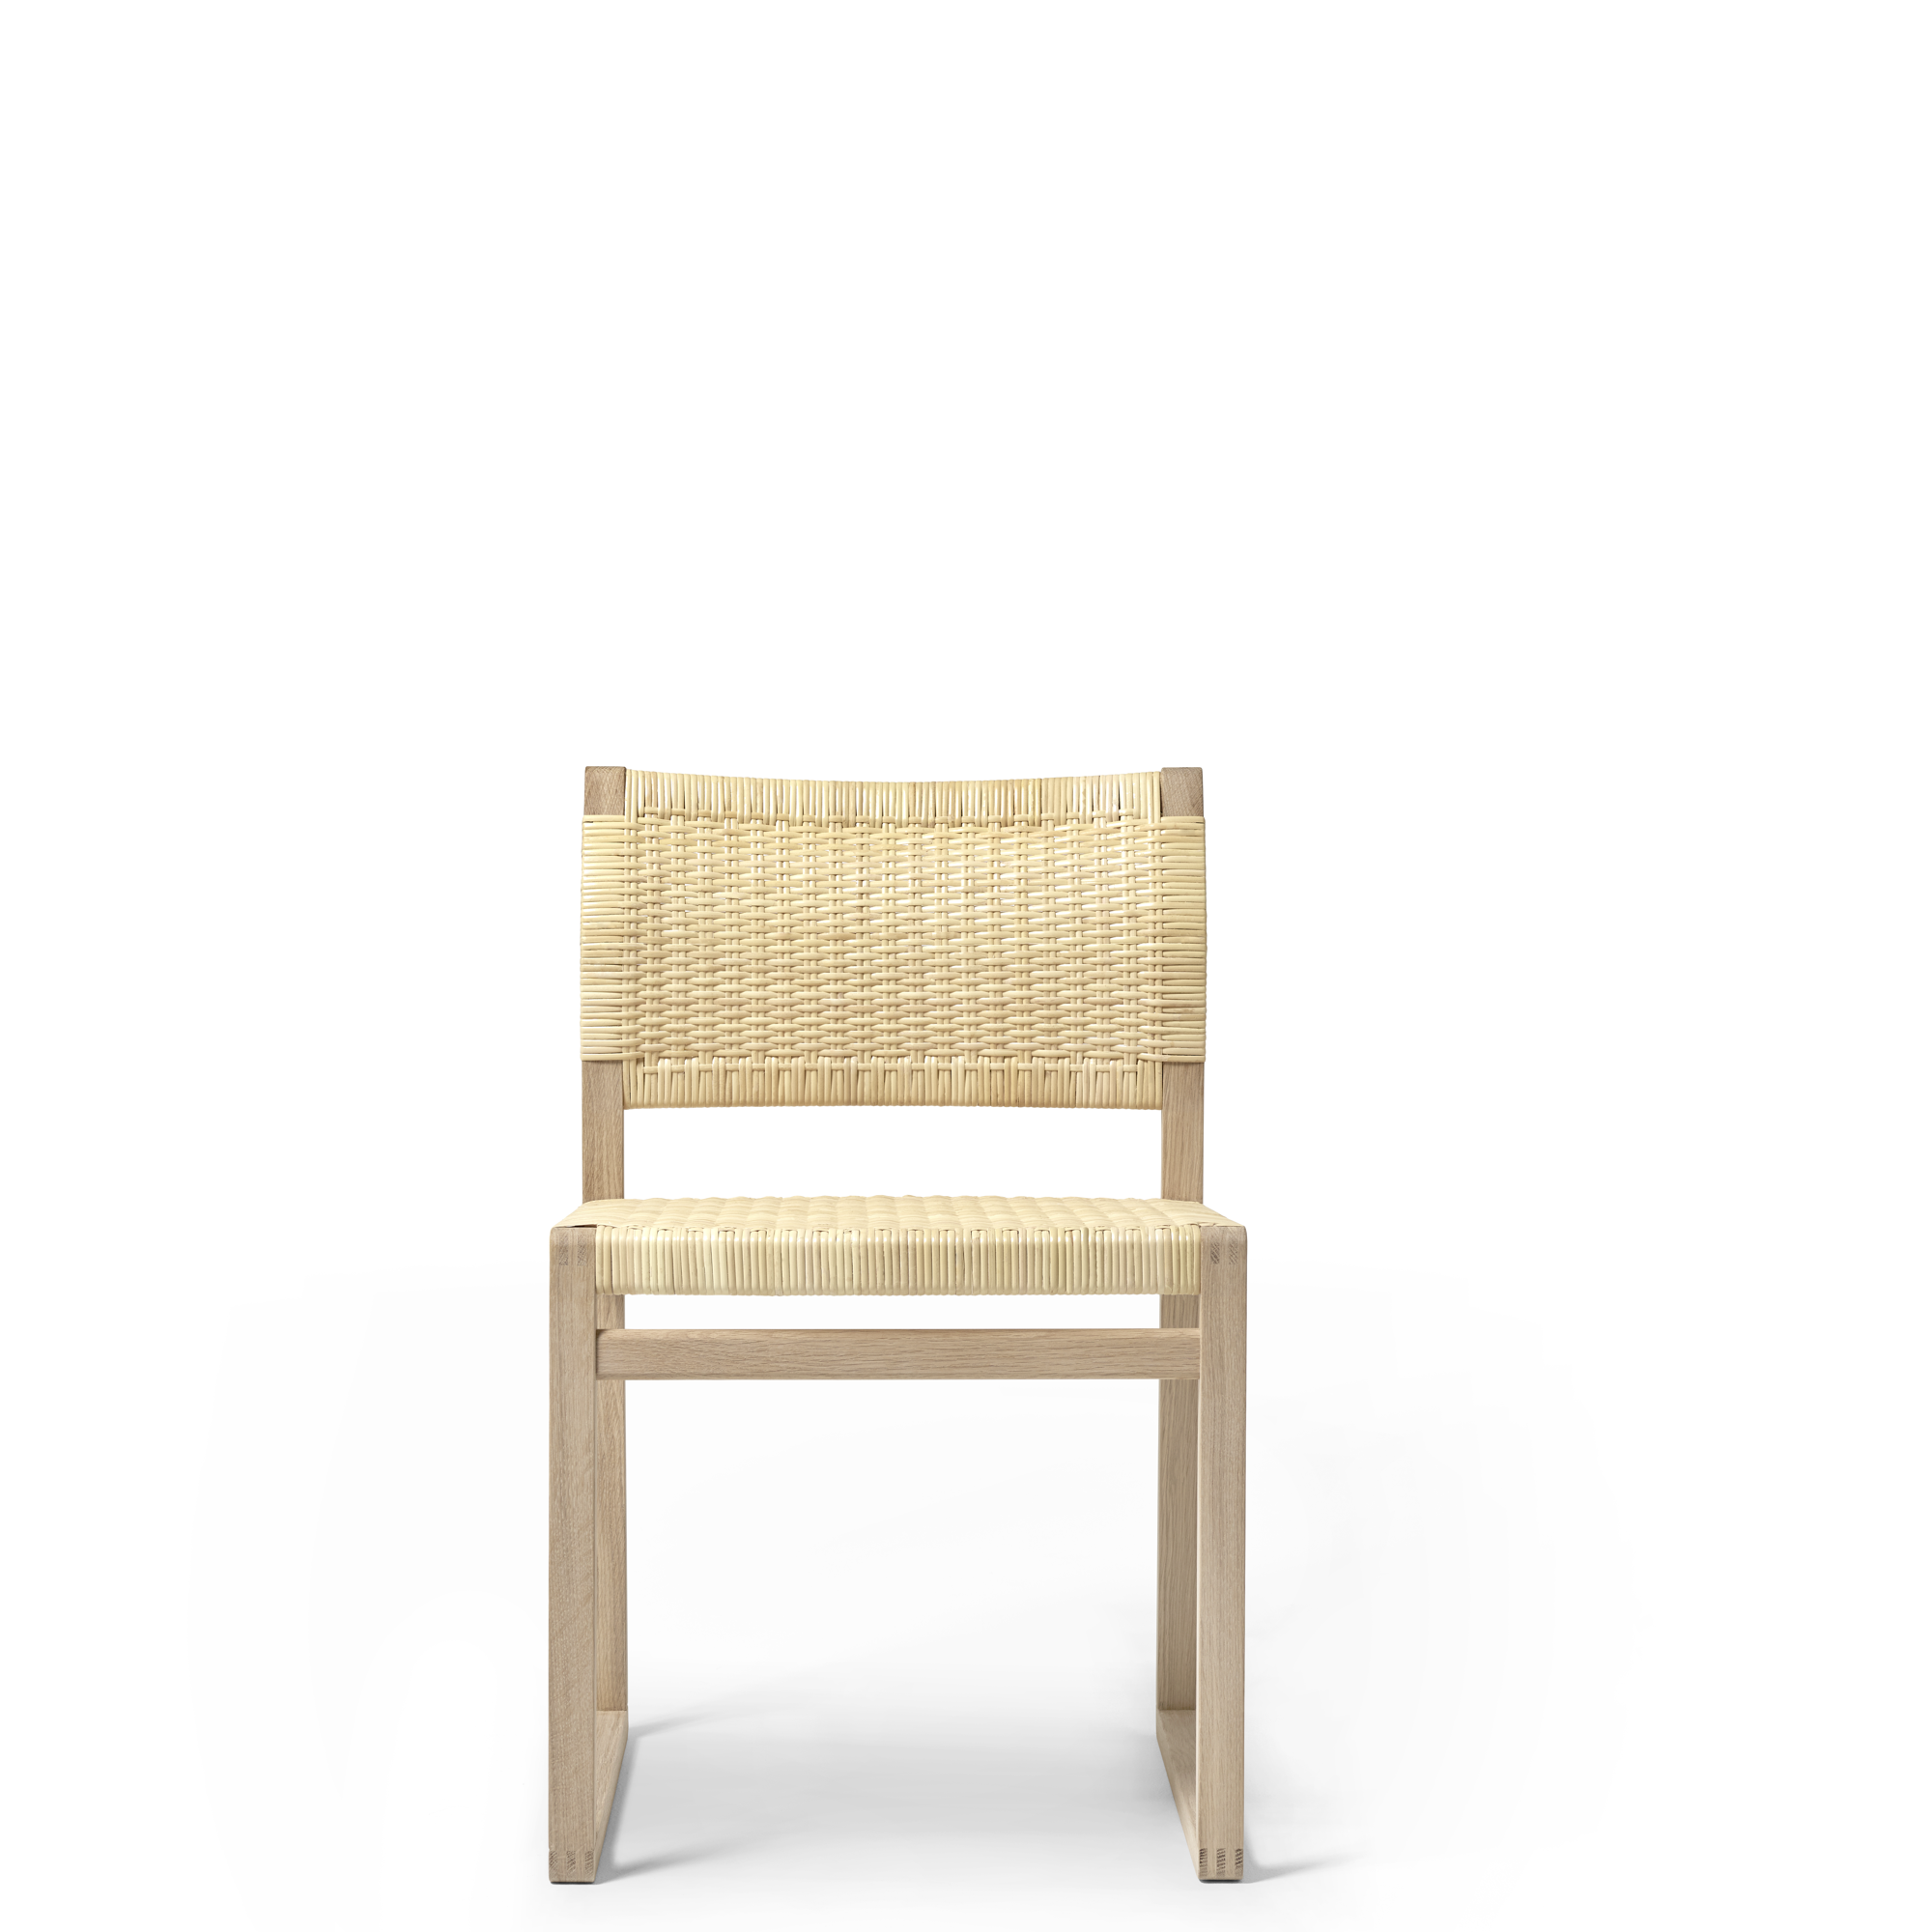 Fredericia Furniture BM61 Dining Table Chair Wicker/Oiled Oak